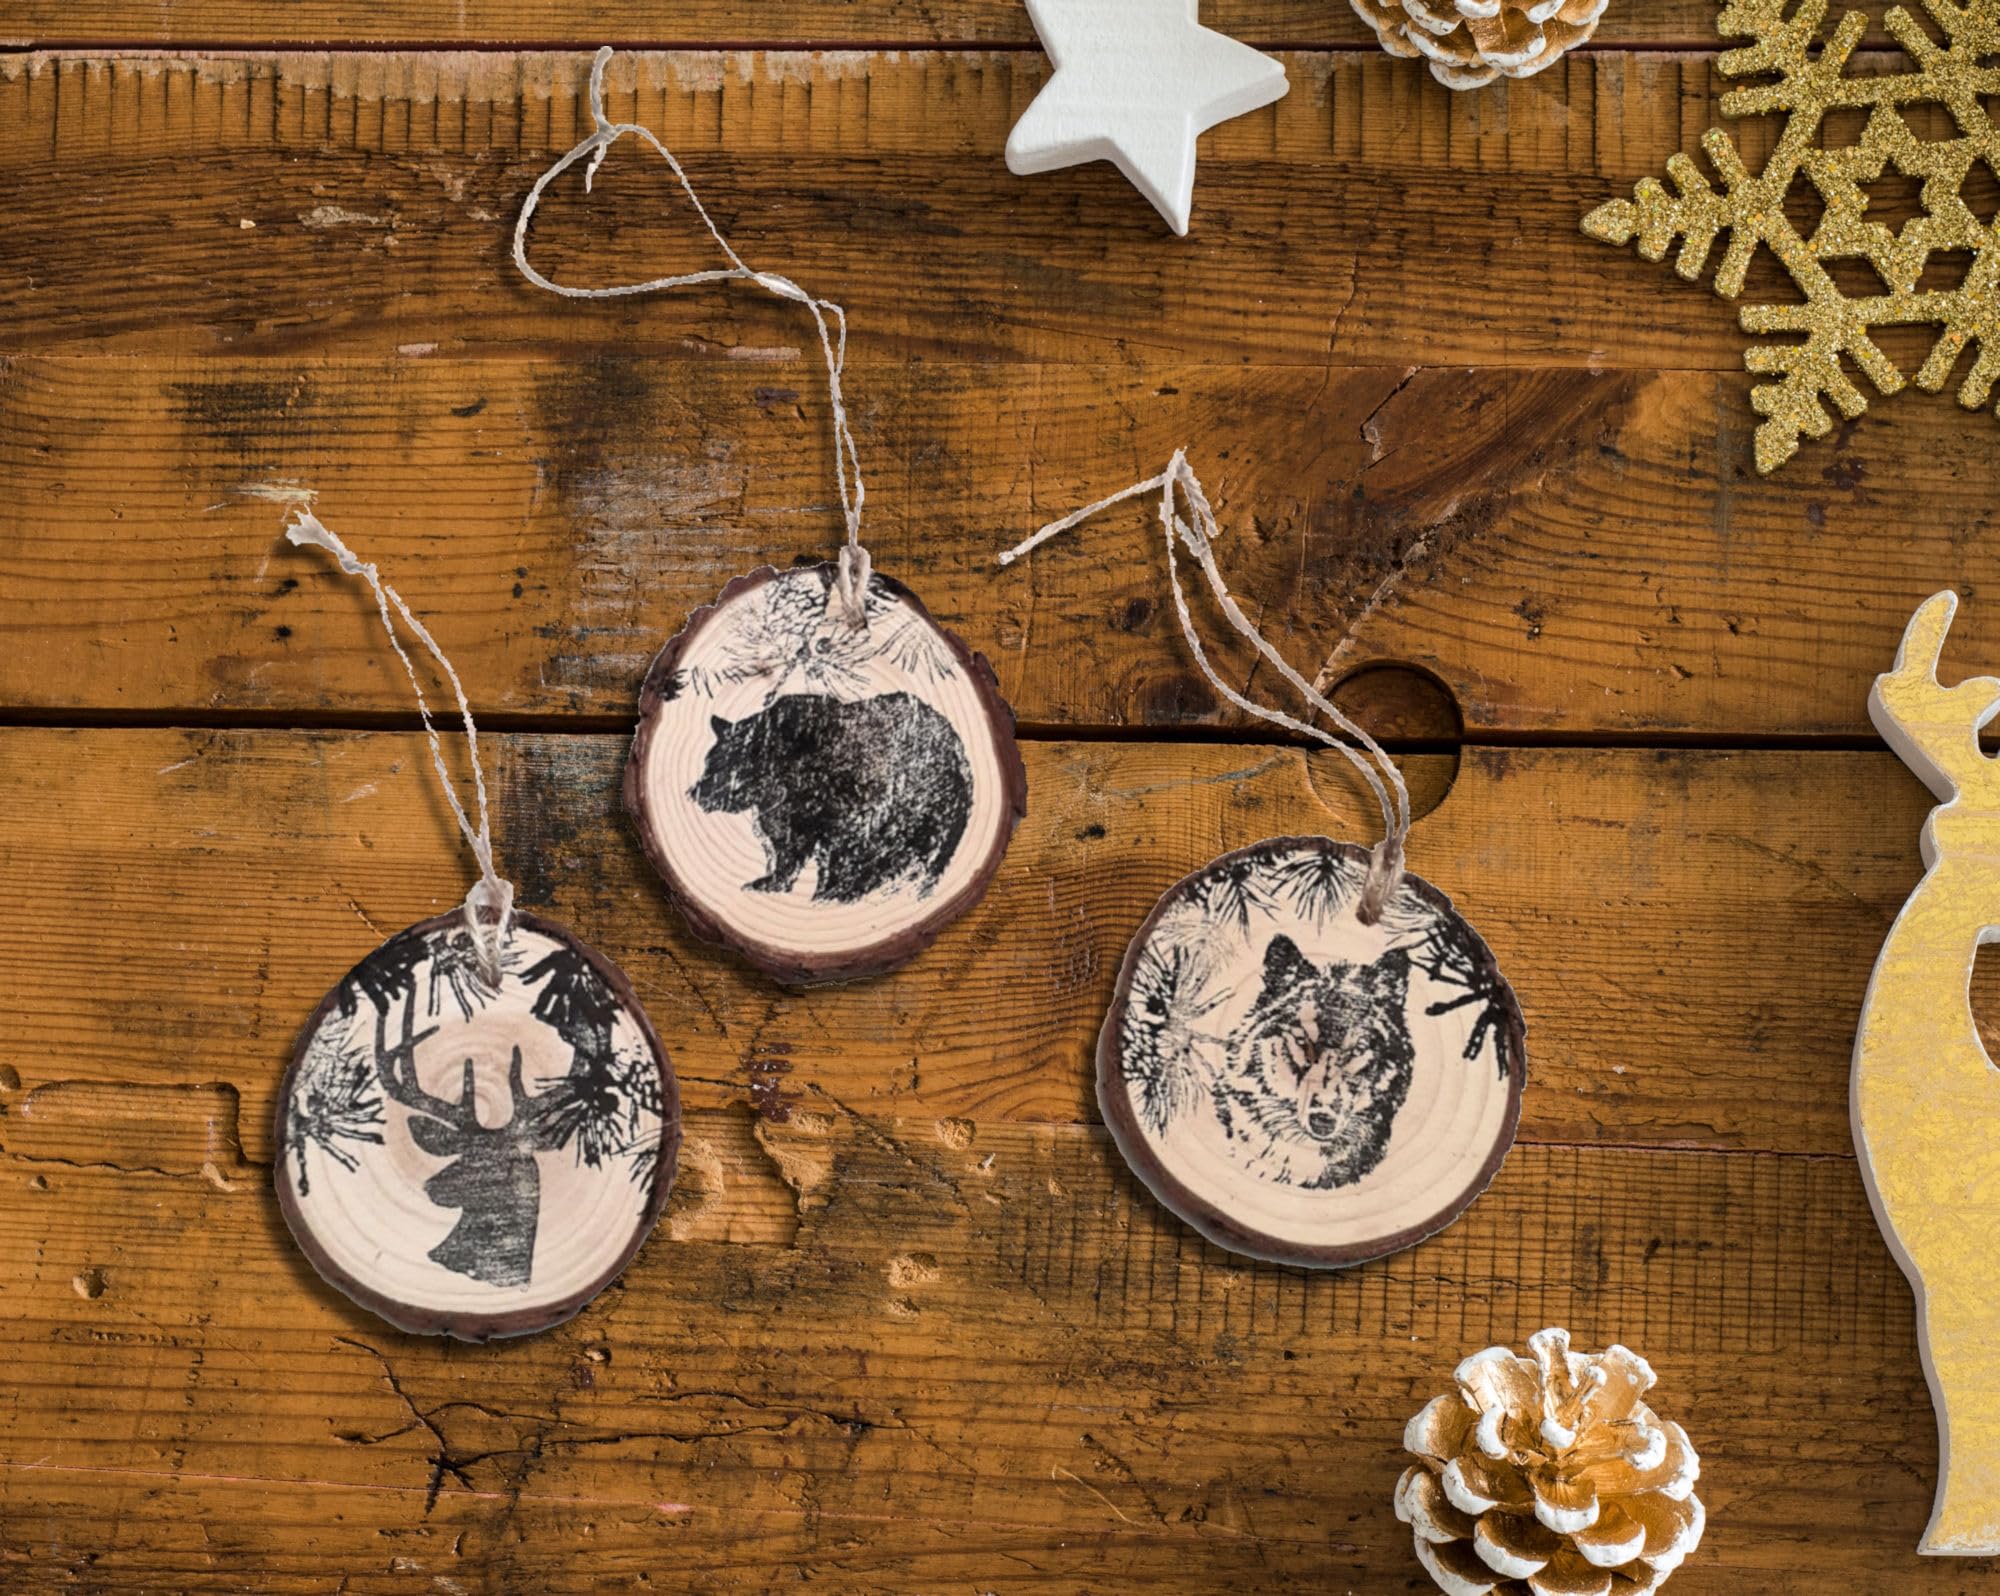 set of 3 Rustic Wood Slice Wildlife Christmas tree ornaments - appx 3 inch diameter, Country, Cabin Holiday Decorations. Wolf, Bear and Deer